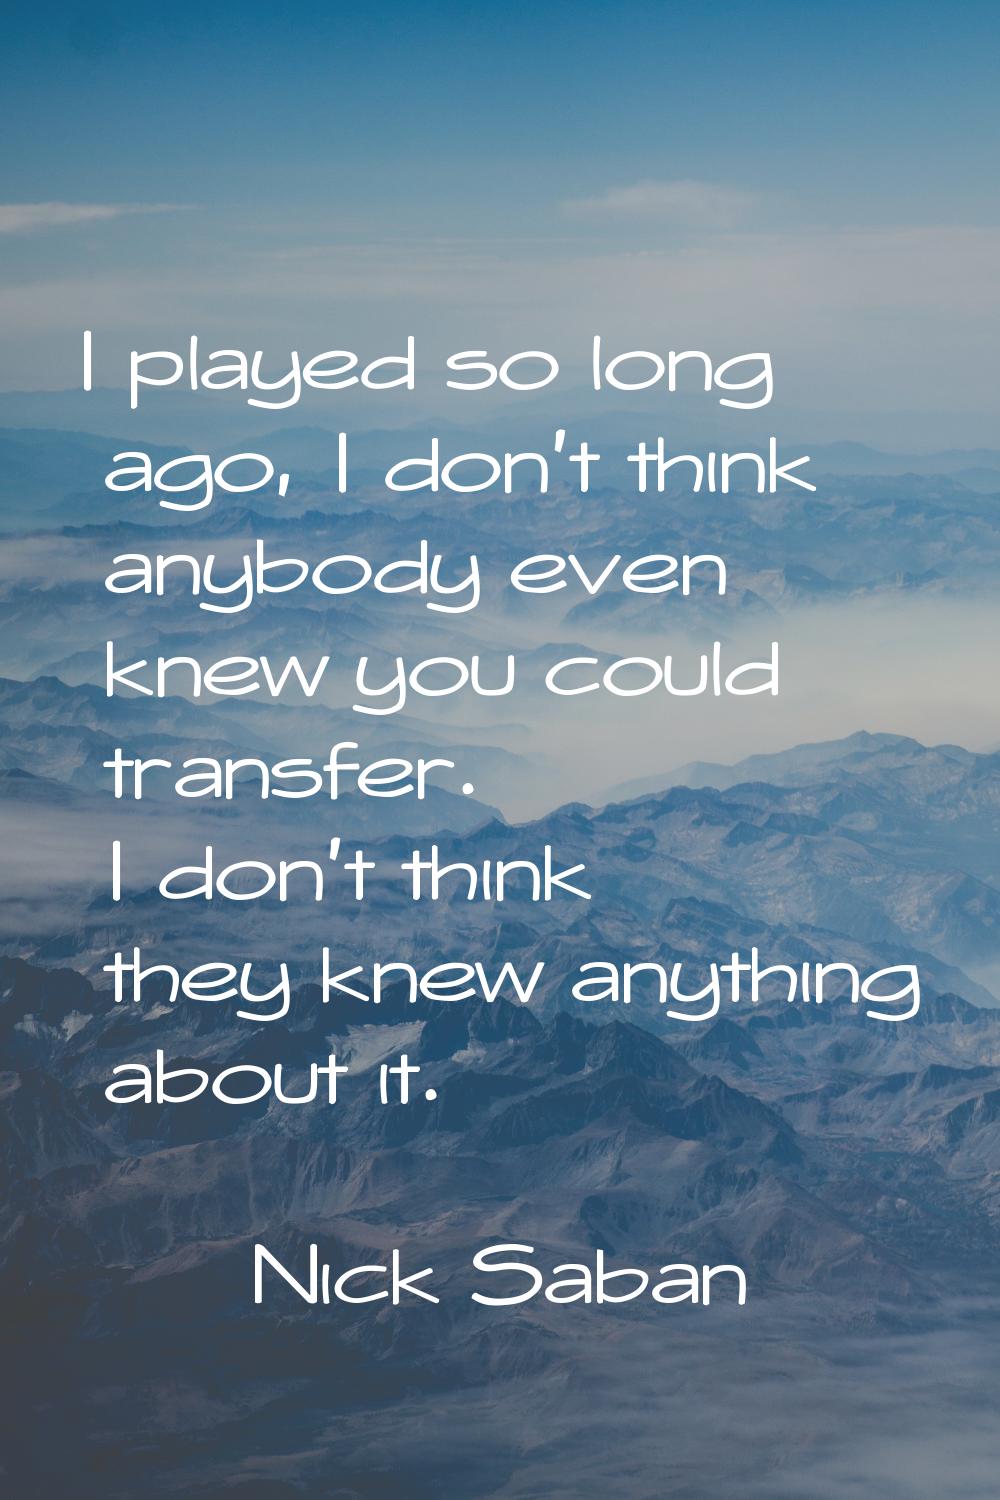 I played so long ago, I don't think anybody even knew you could transfer. I don't think they knew a